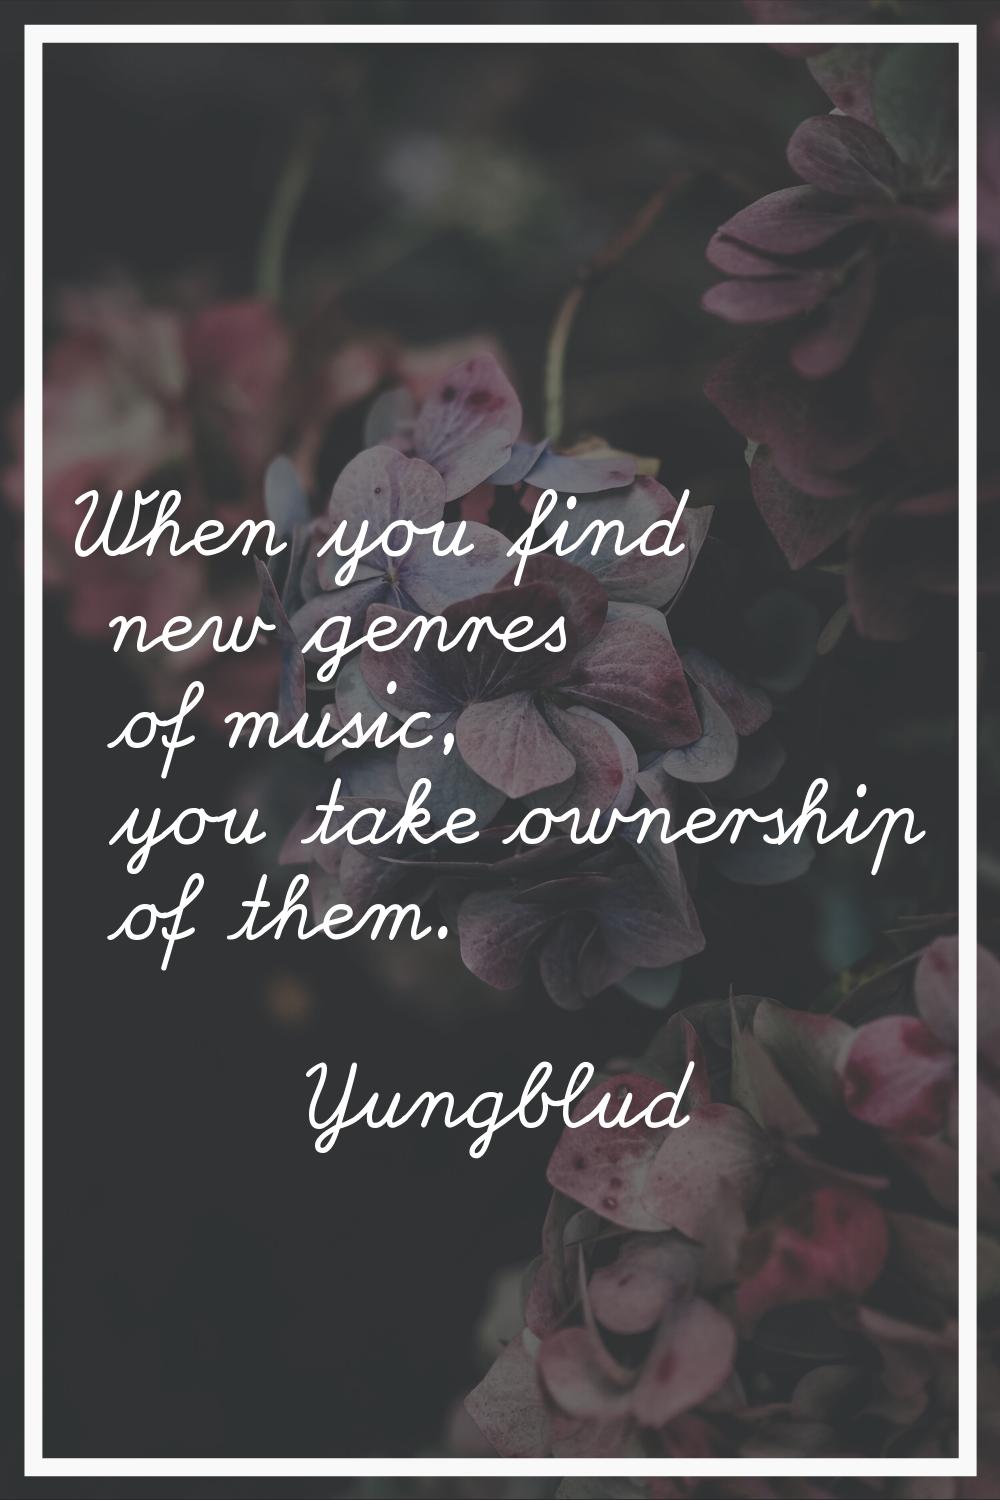 When you find new genres of music, you take ownership of them.